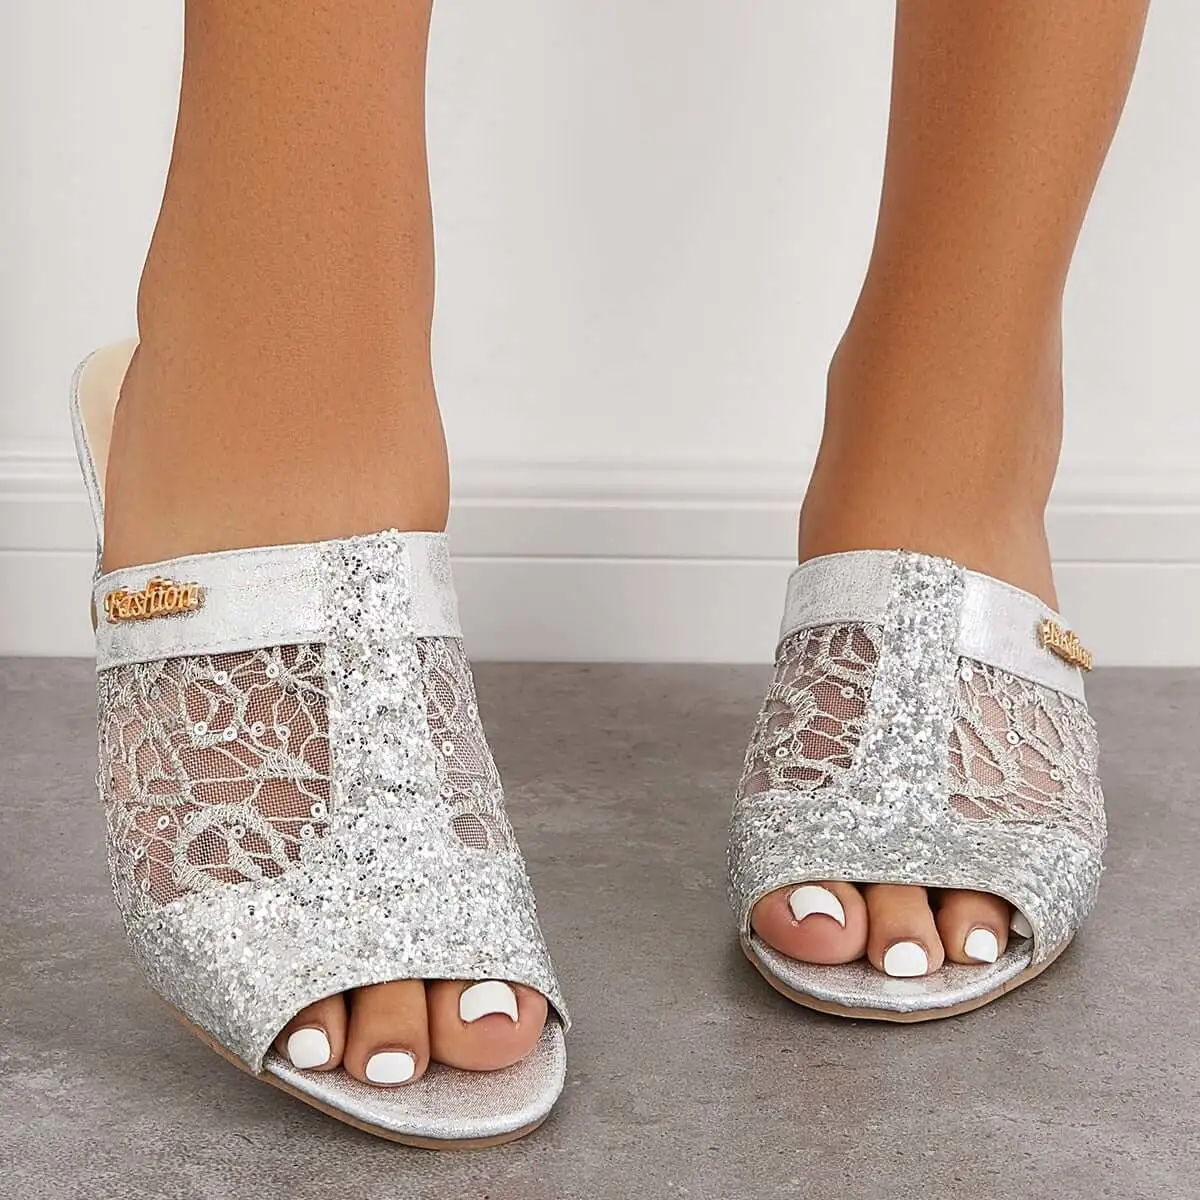 Floral Embroidery Backless Mules Slip on Block Heel Sandals